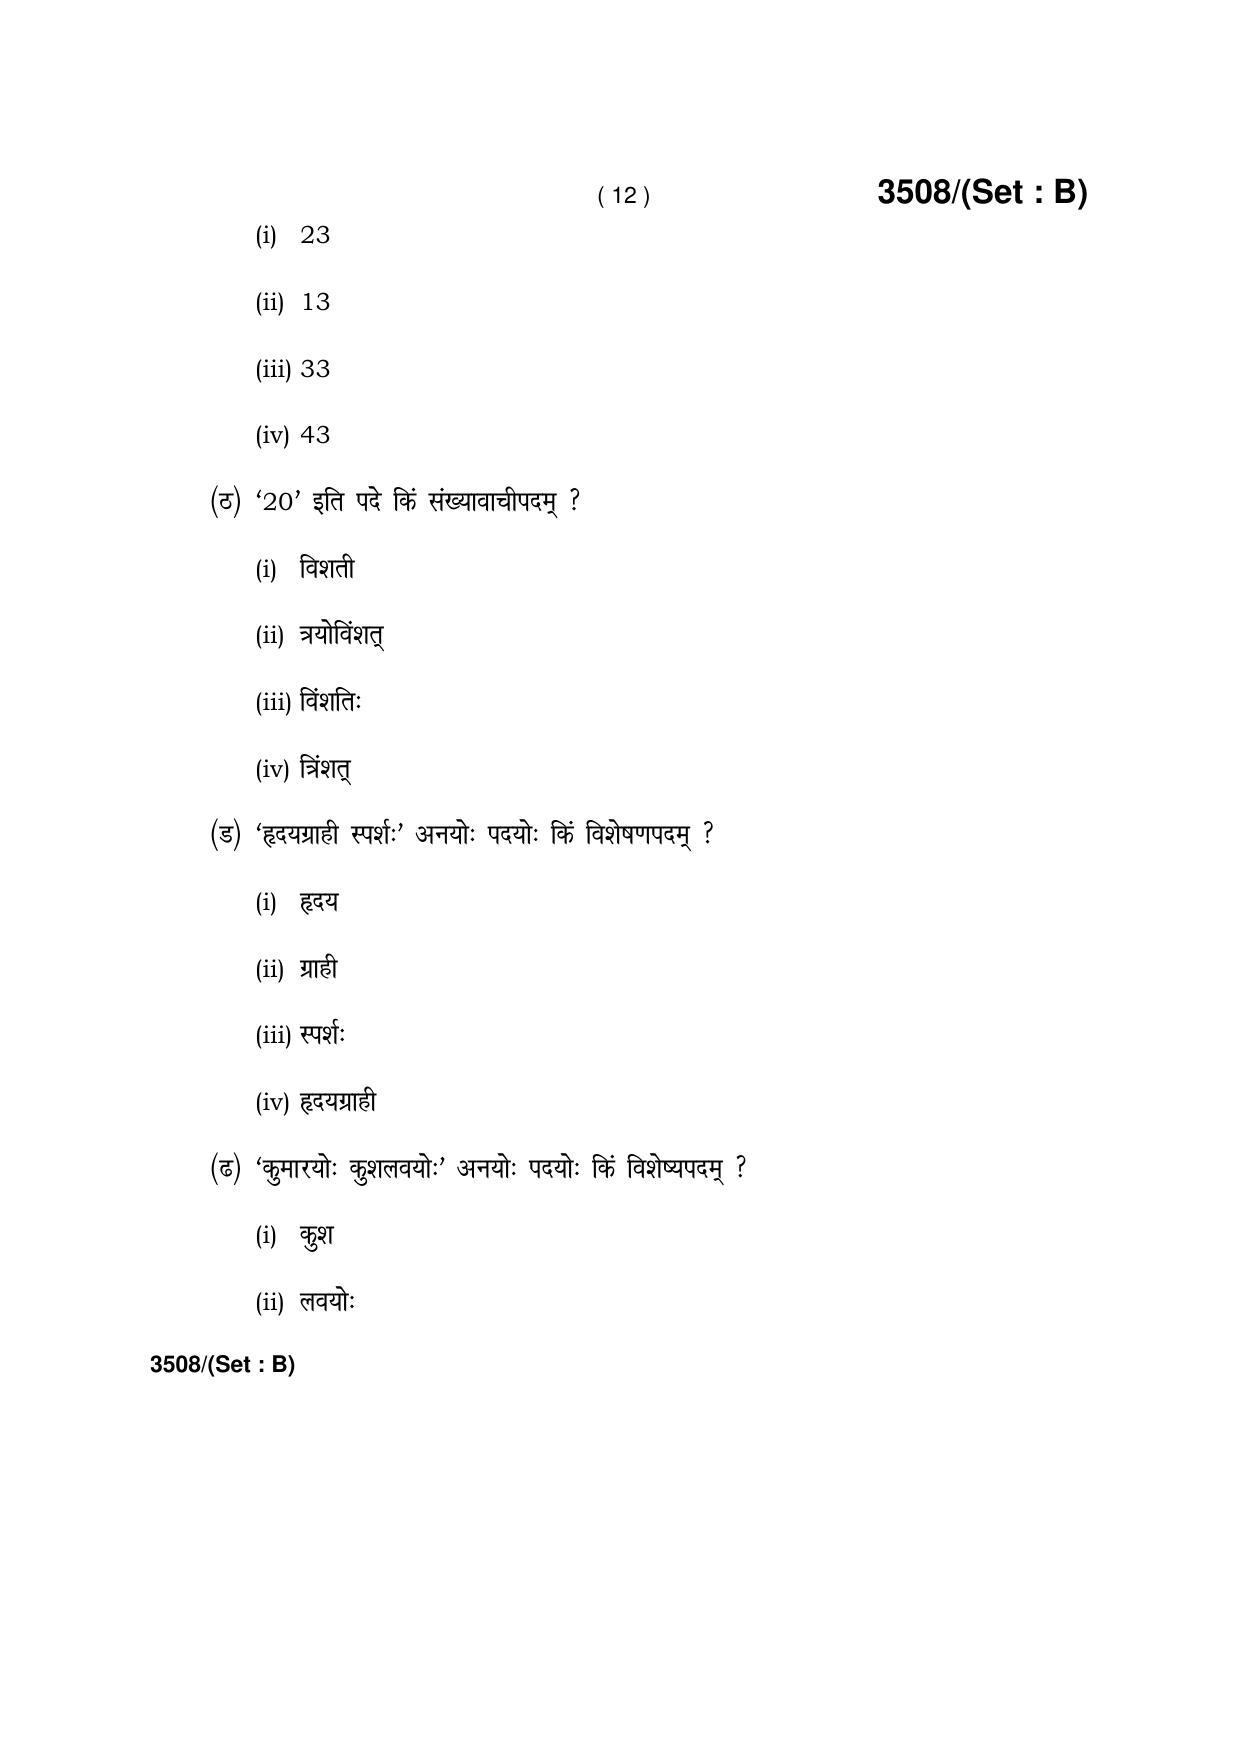 Haryana Board HBSE Class 10 Sanskrit -B 2018 Question Paper - Page 12